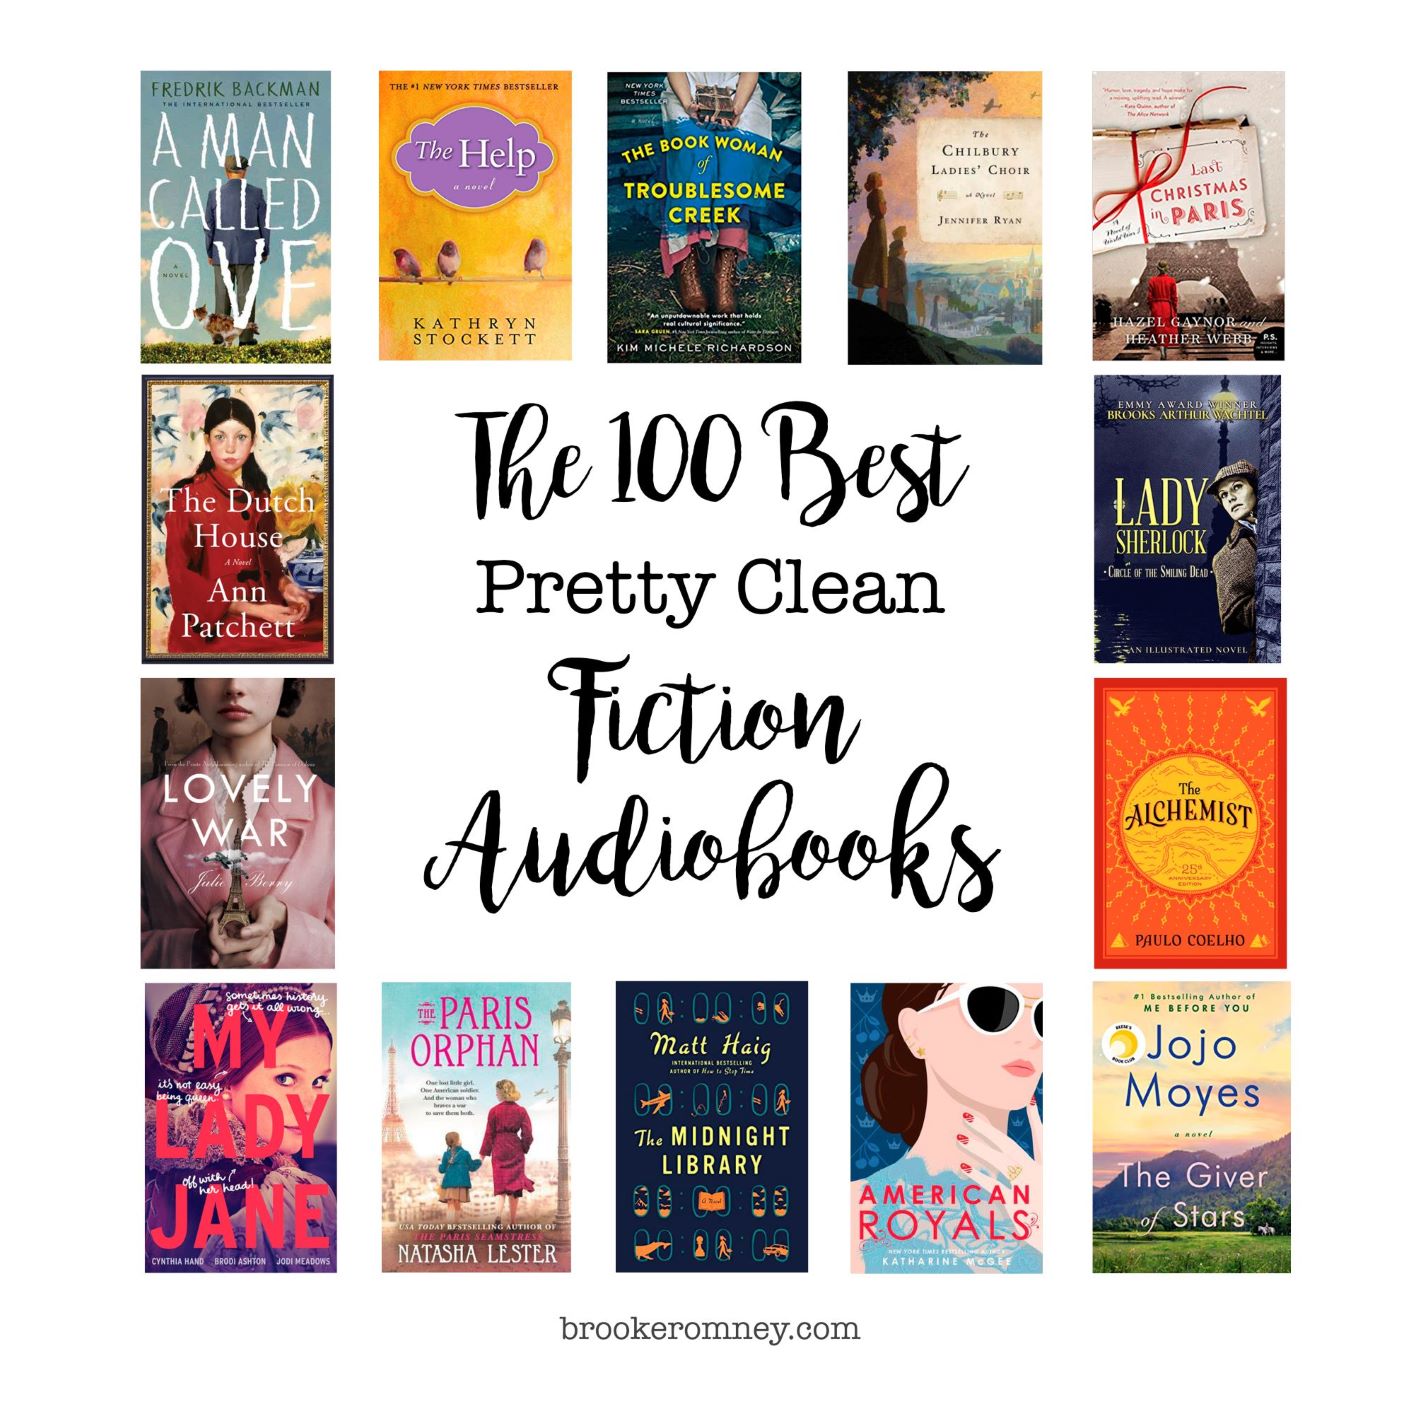 The 100 Best Pretty Clean Fiction Audiobooks